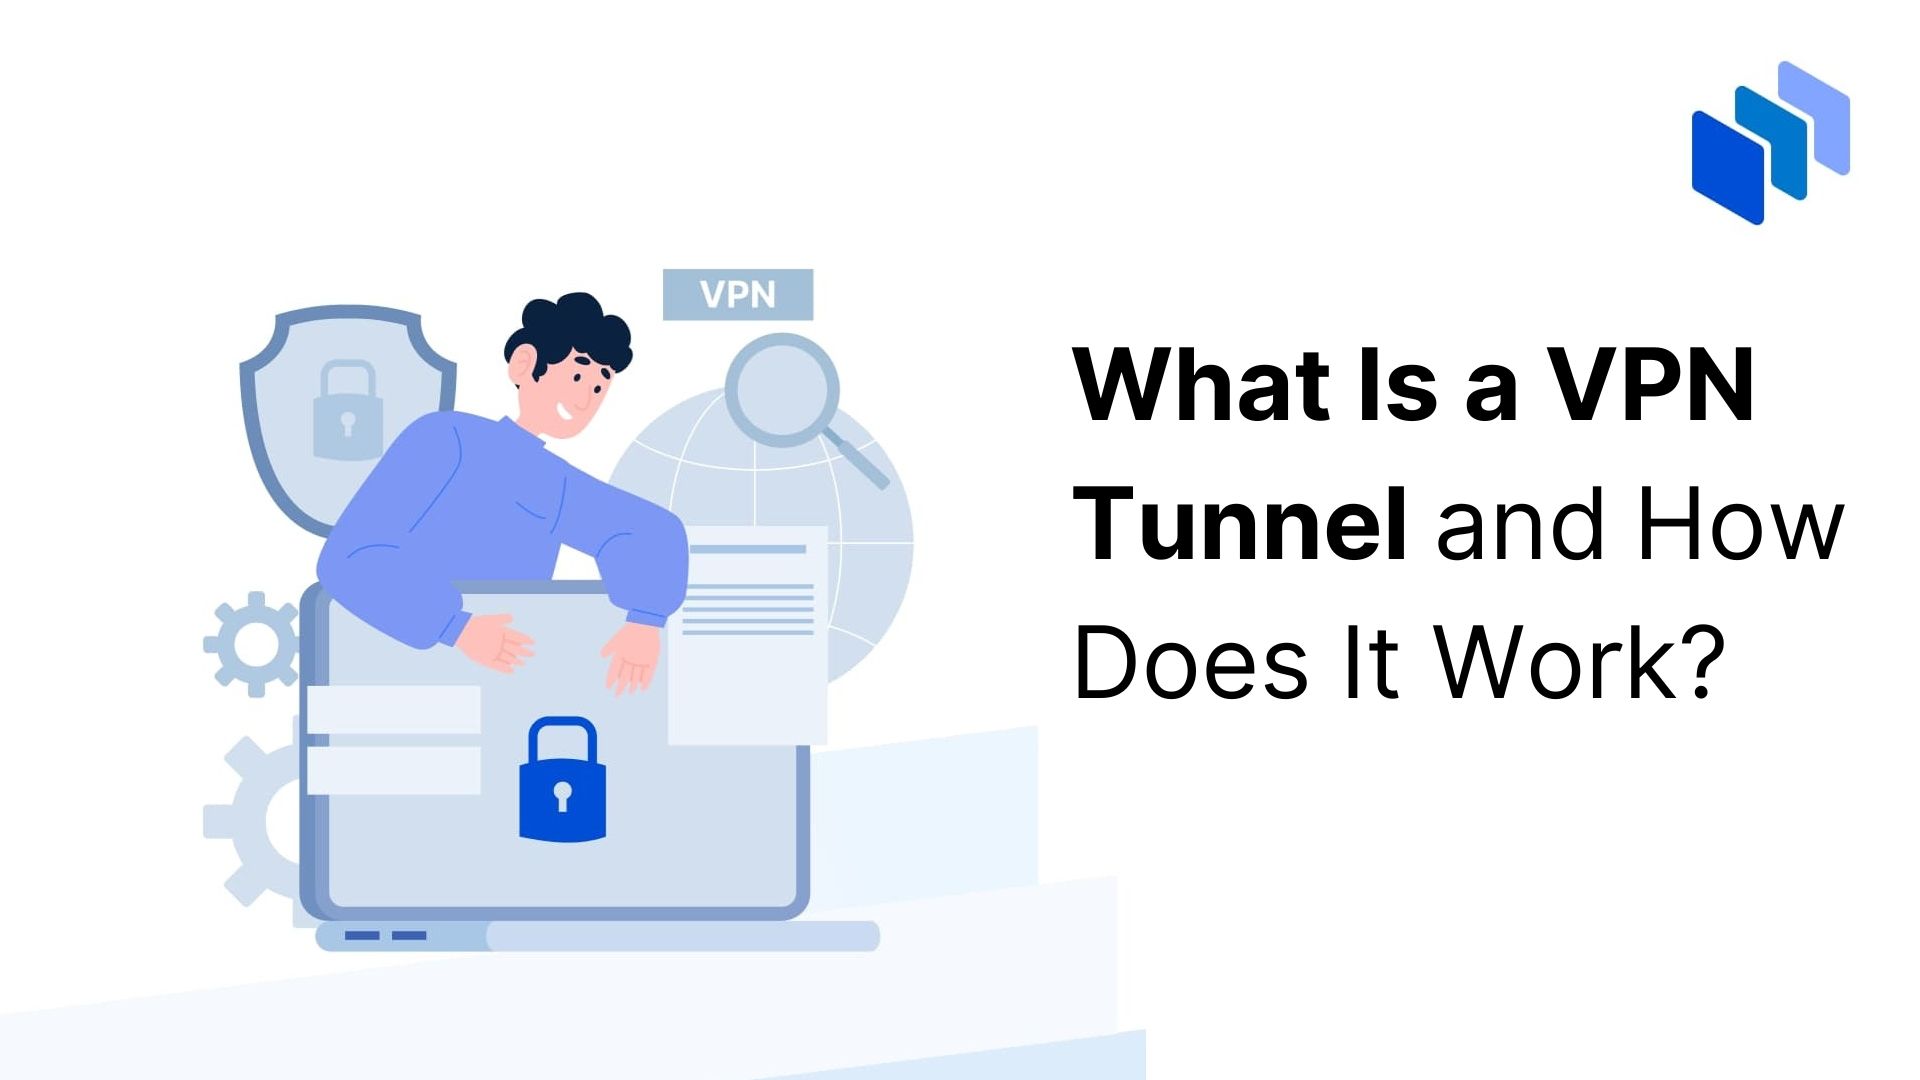 What Is a VPN Tunnel and How Does It Work